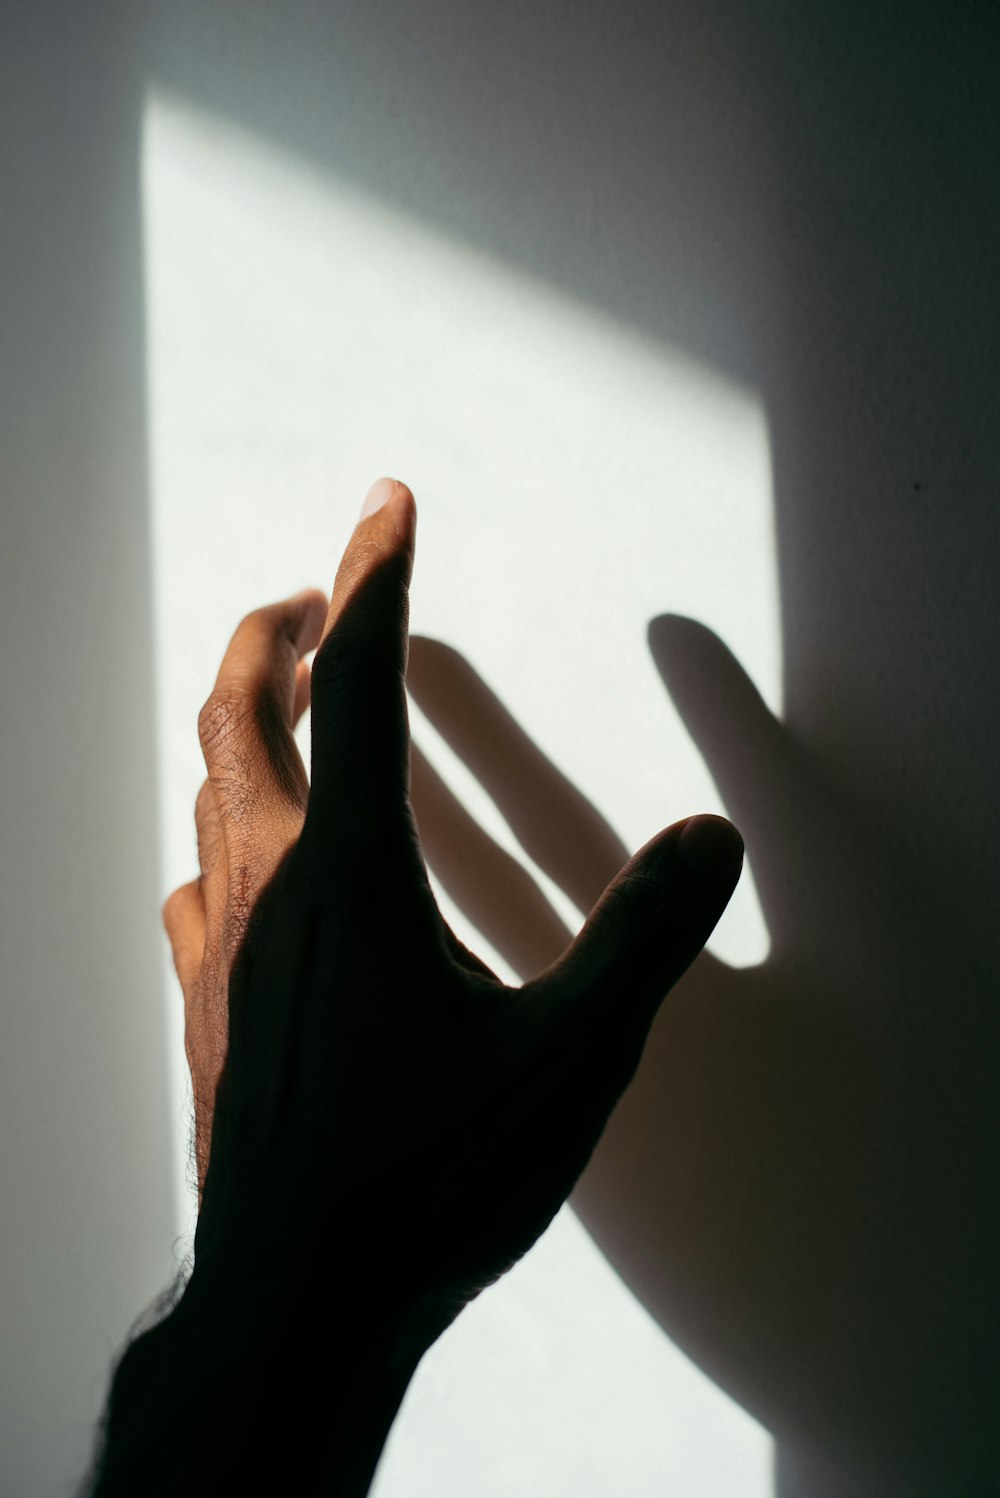 person's left hand and shadow